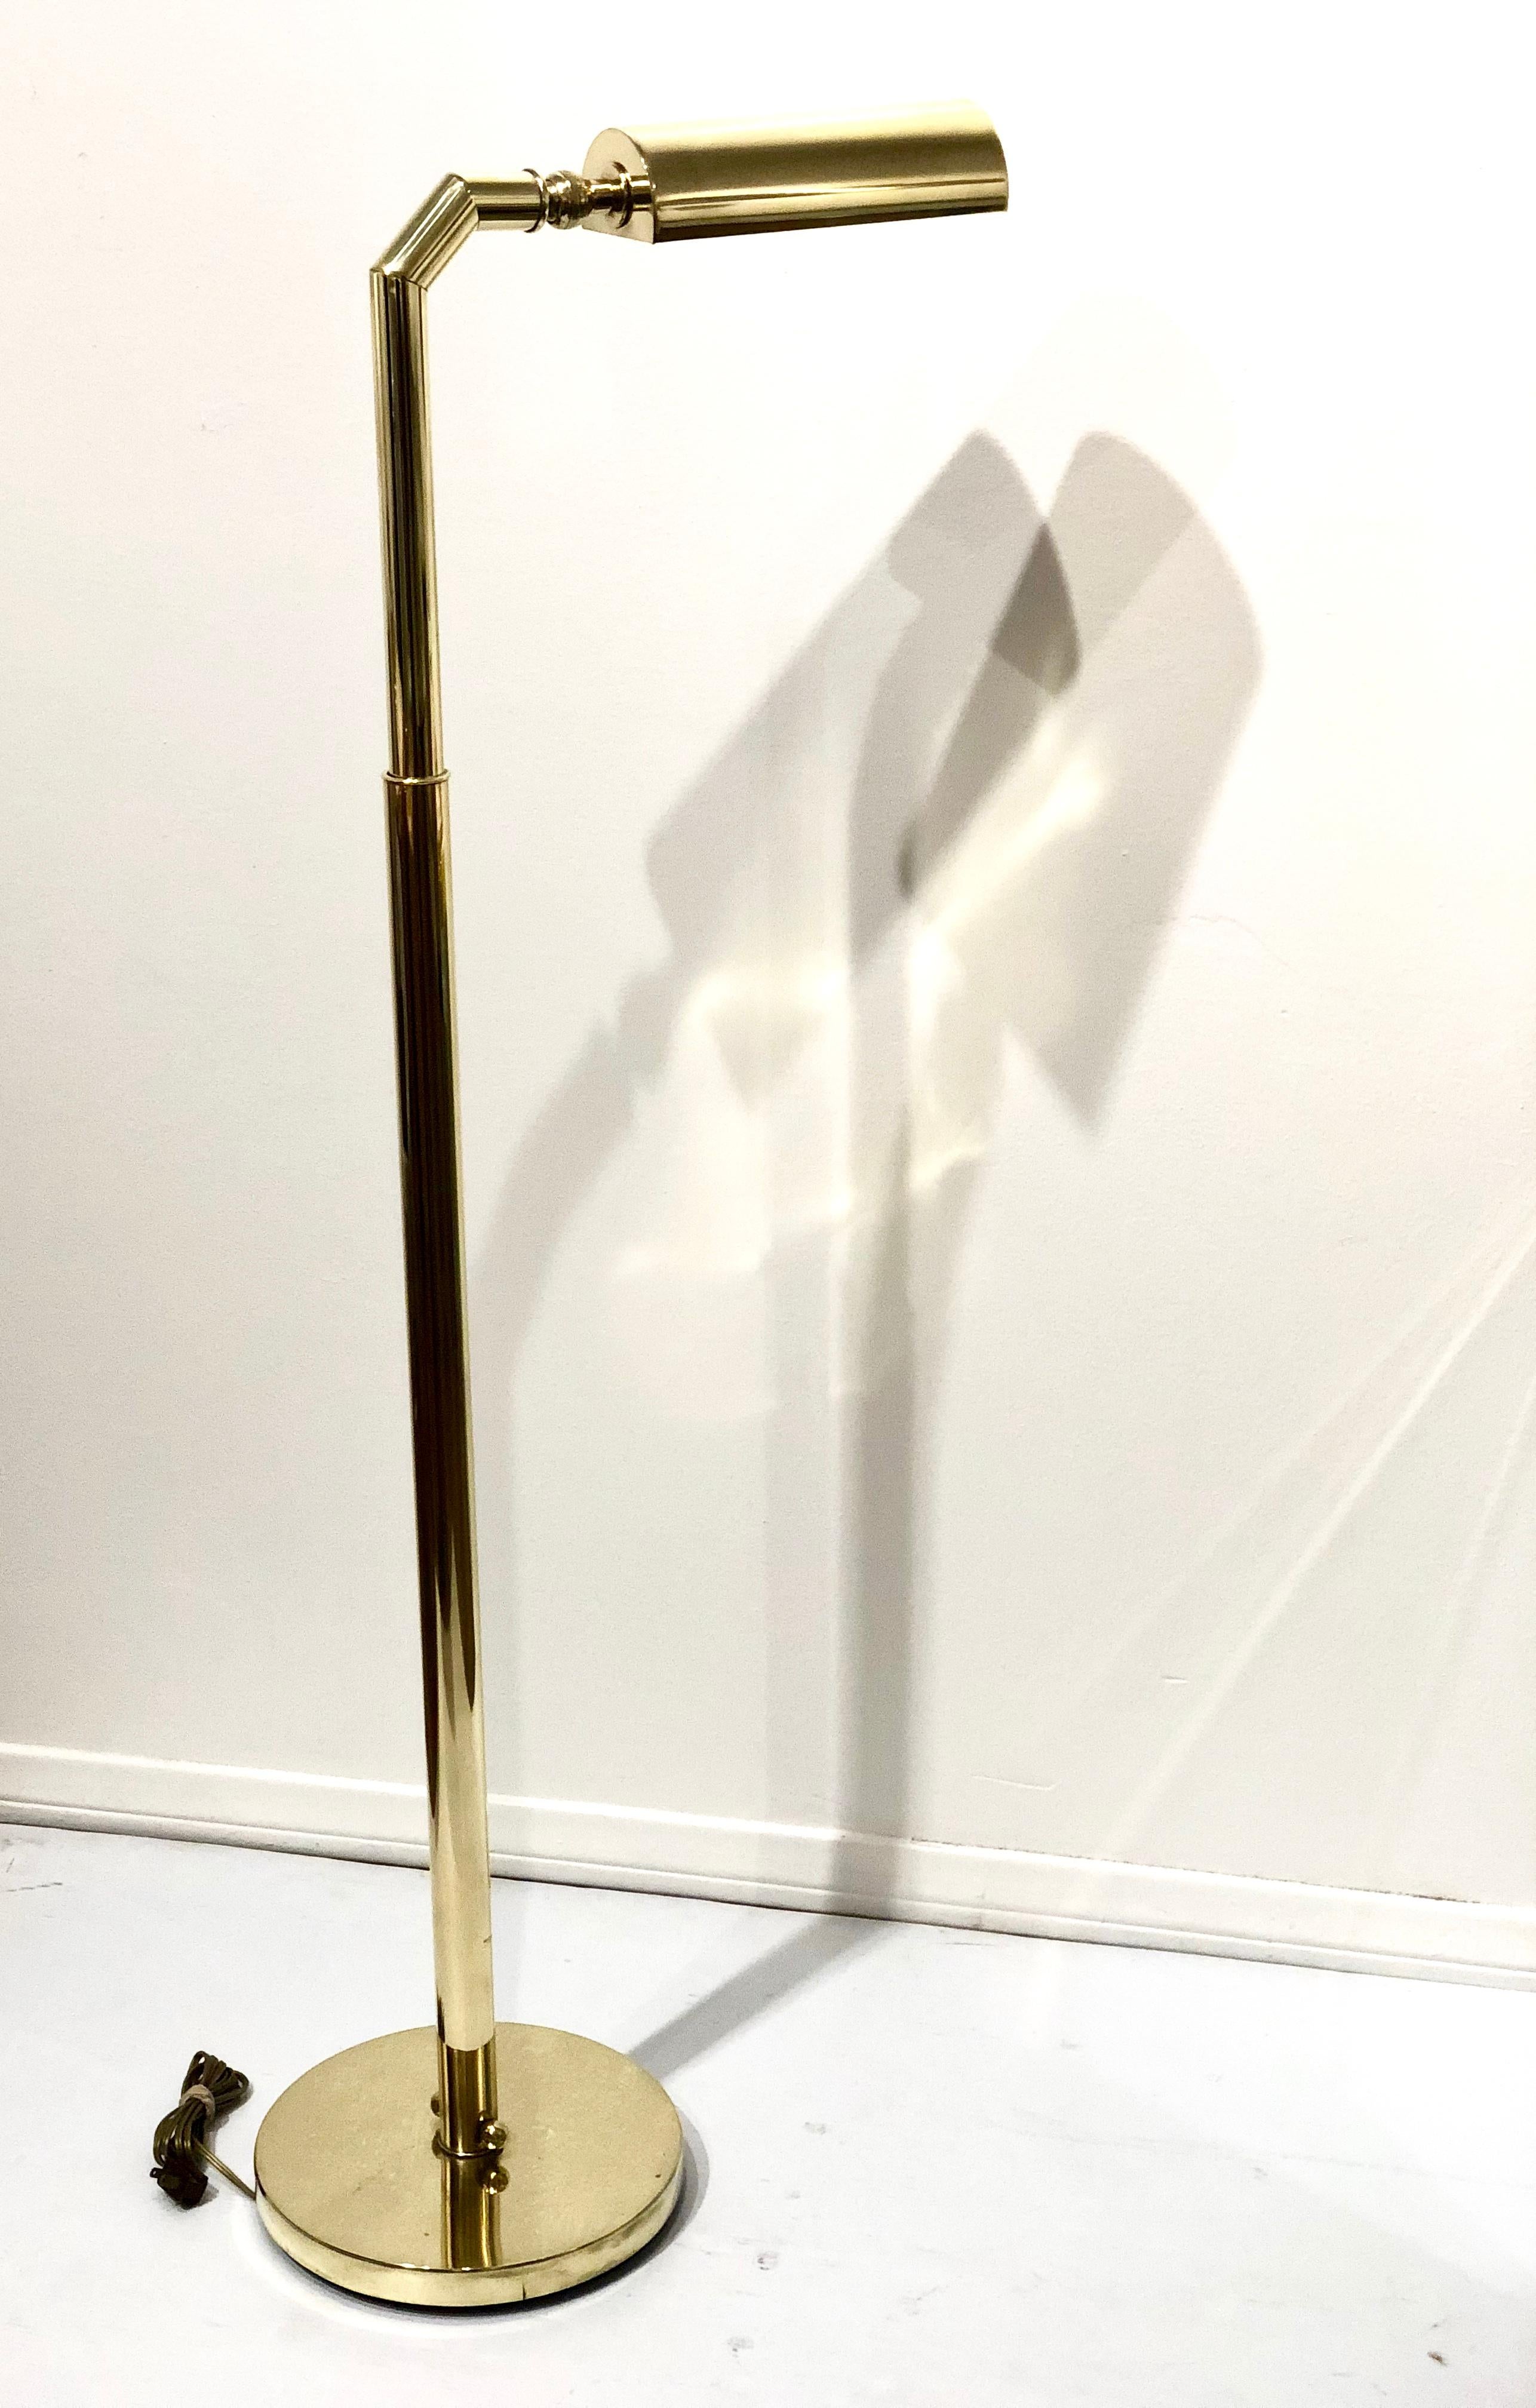 Elegant floor lamp in a polished brass finish, circa 1970s. The lamp is multi-directional (goes up and down and shade rotates from side to side) and is in good working condition. The lamp goes to 56